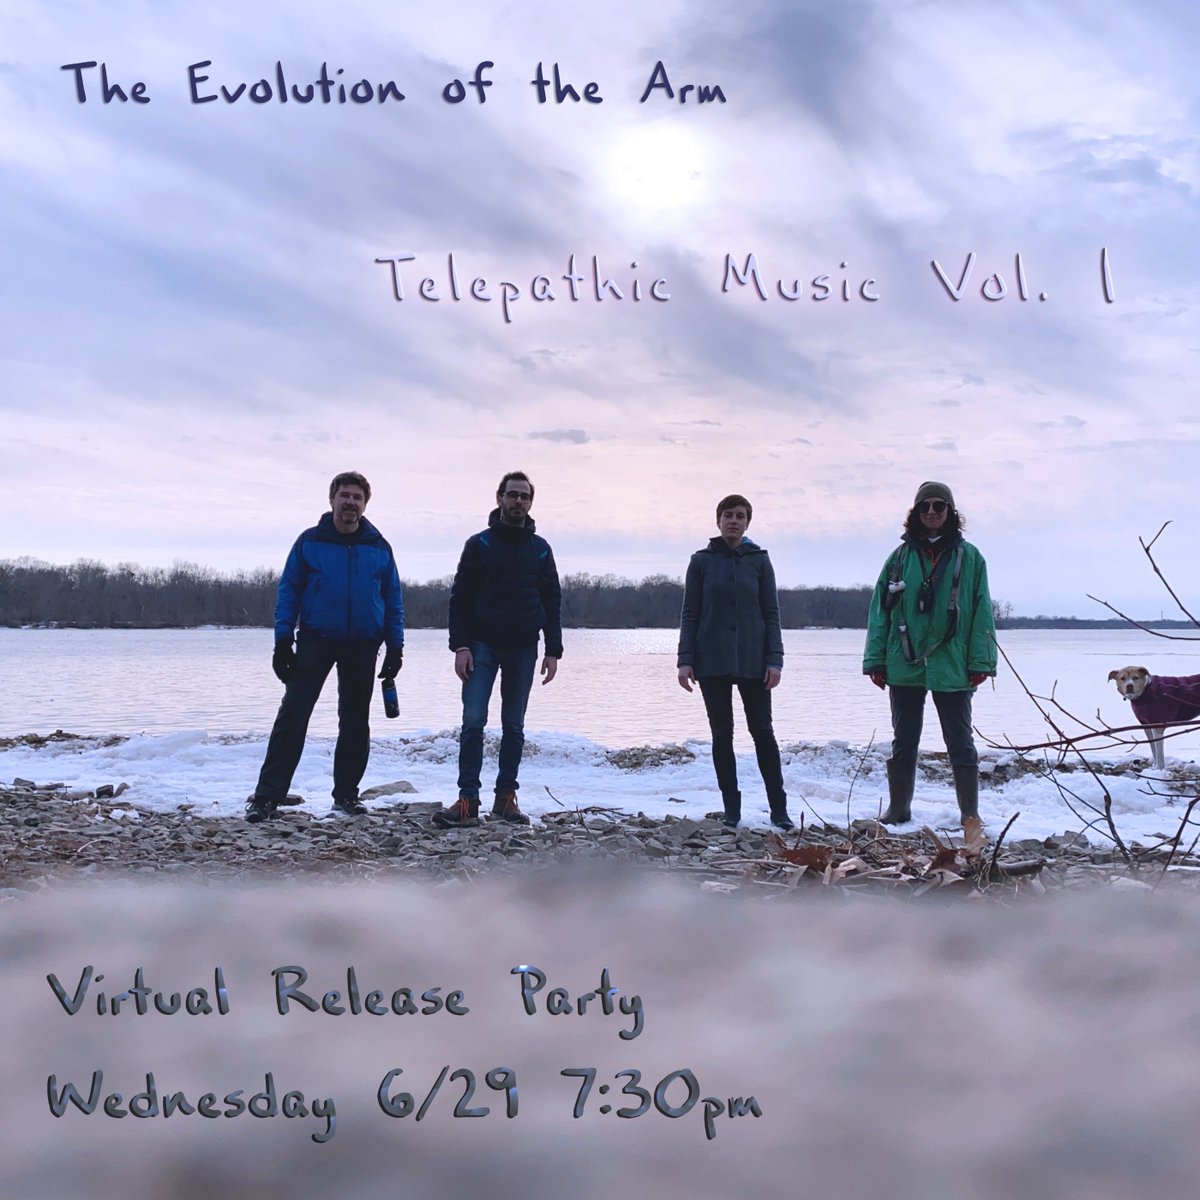 We're excited to announce that this week @Evolution_Arm releases Telepathic Music Vol. 1, their first EP of music improvised on the astral plane! The EP will be available Wed, June 29, and the band is hosting a free virtual release party to celebrate: forms.gle/xie2B5QqFn1fra…